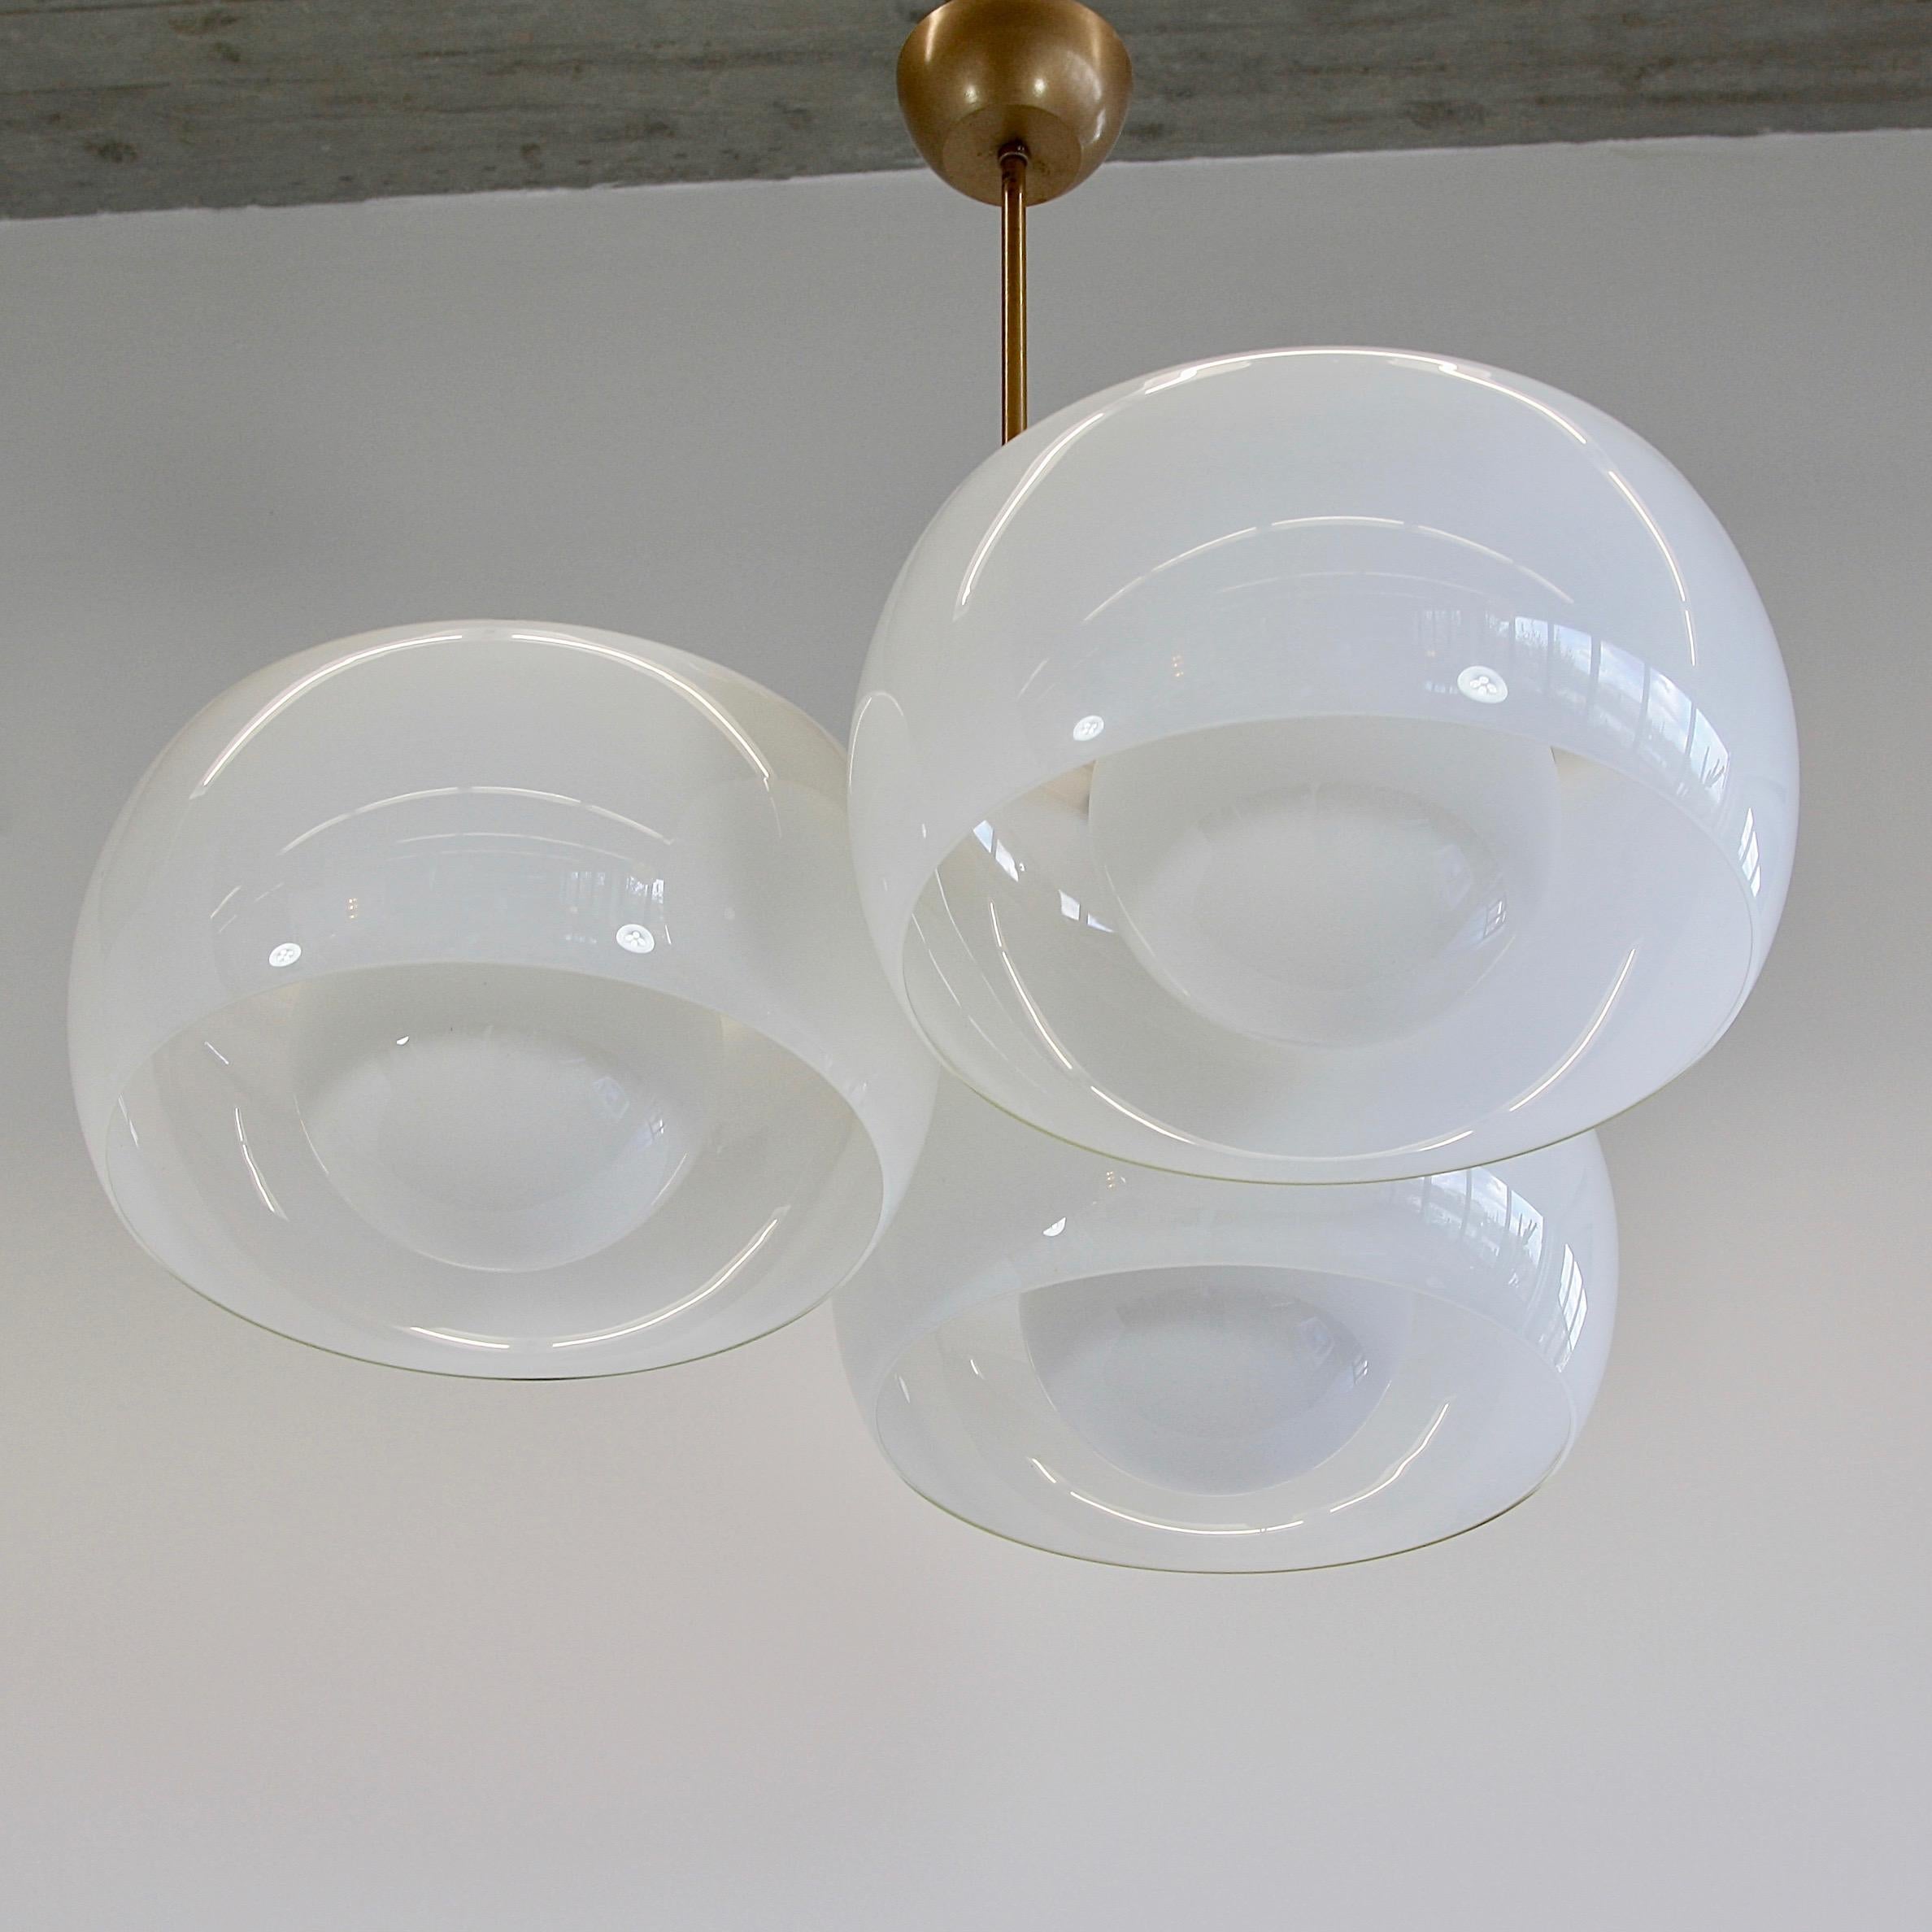 Modern Ceiling Lamp Designed by Vico Magistretti for Artemide, 1961